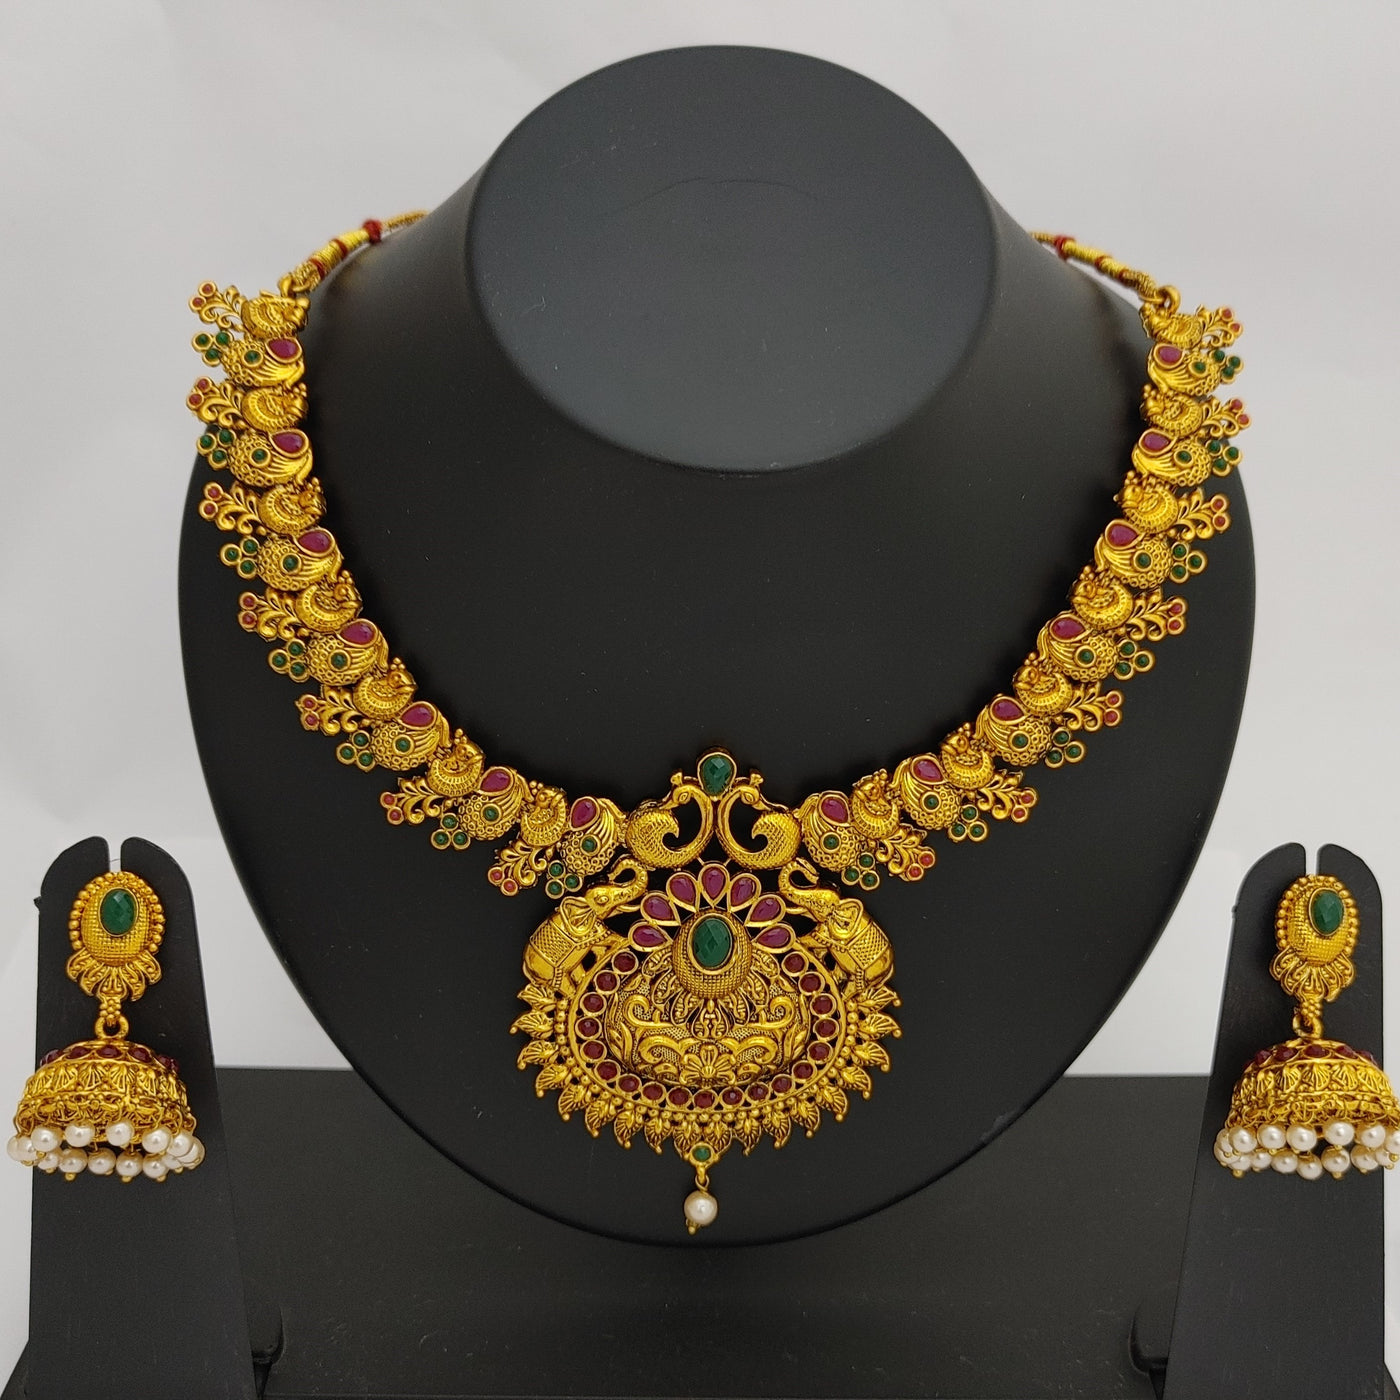 Estele Gold Plated Artistically Crafted Gajaraj with Peacocks Nakshi Temple Necklace Set